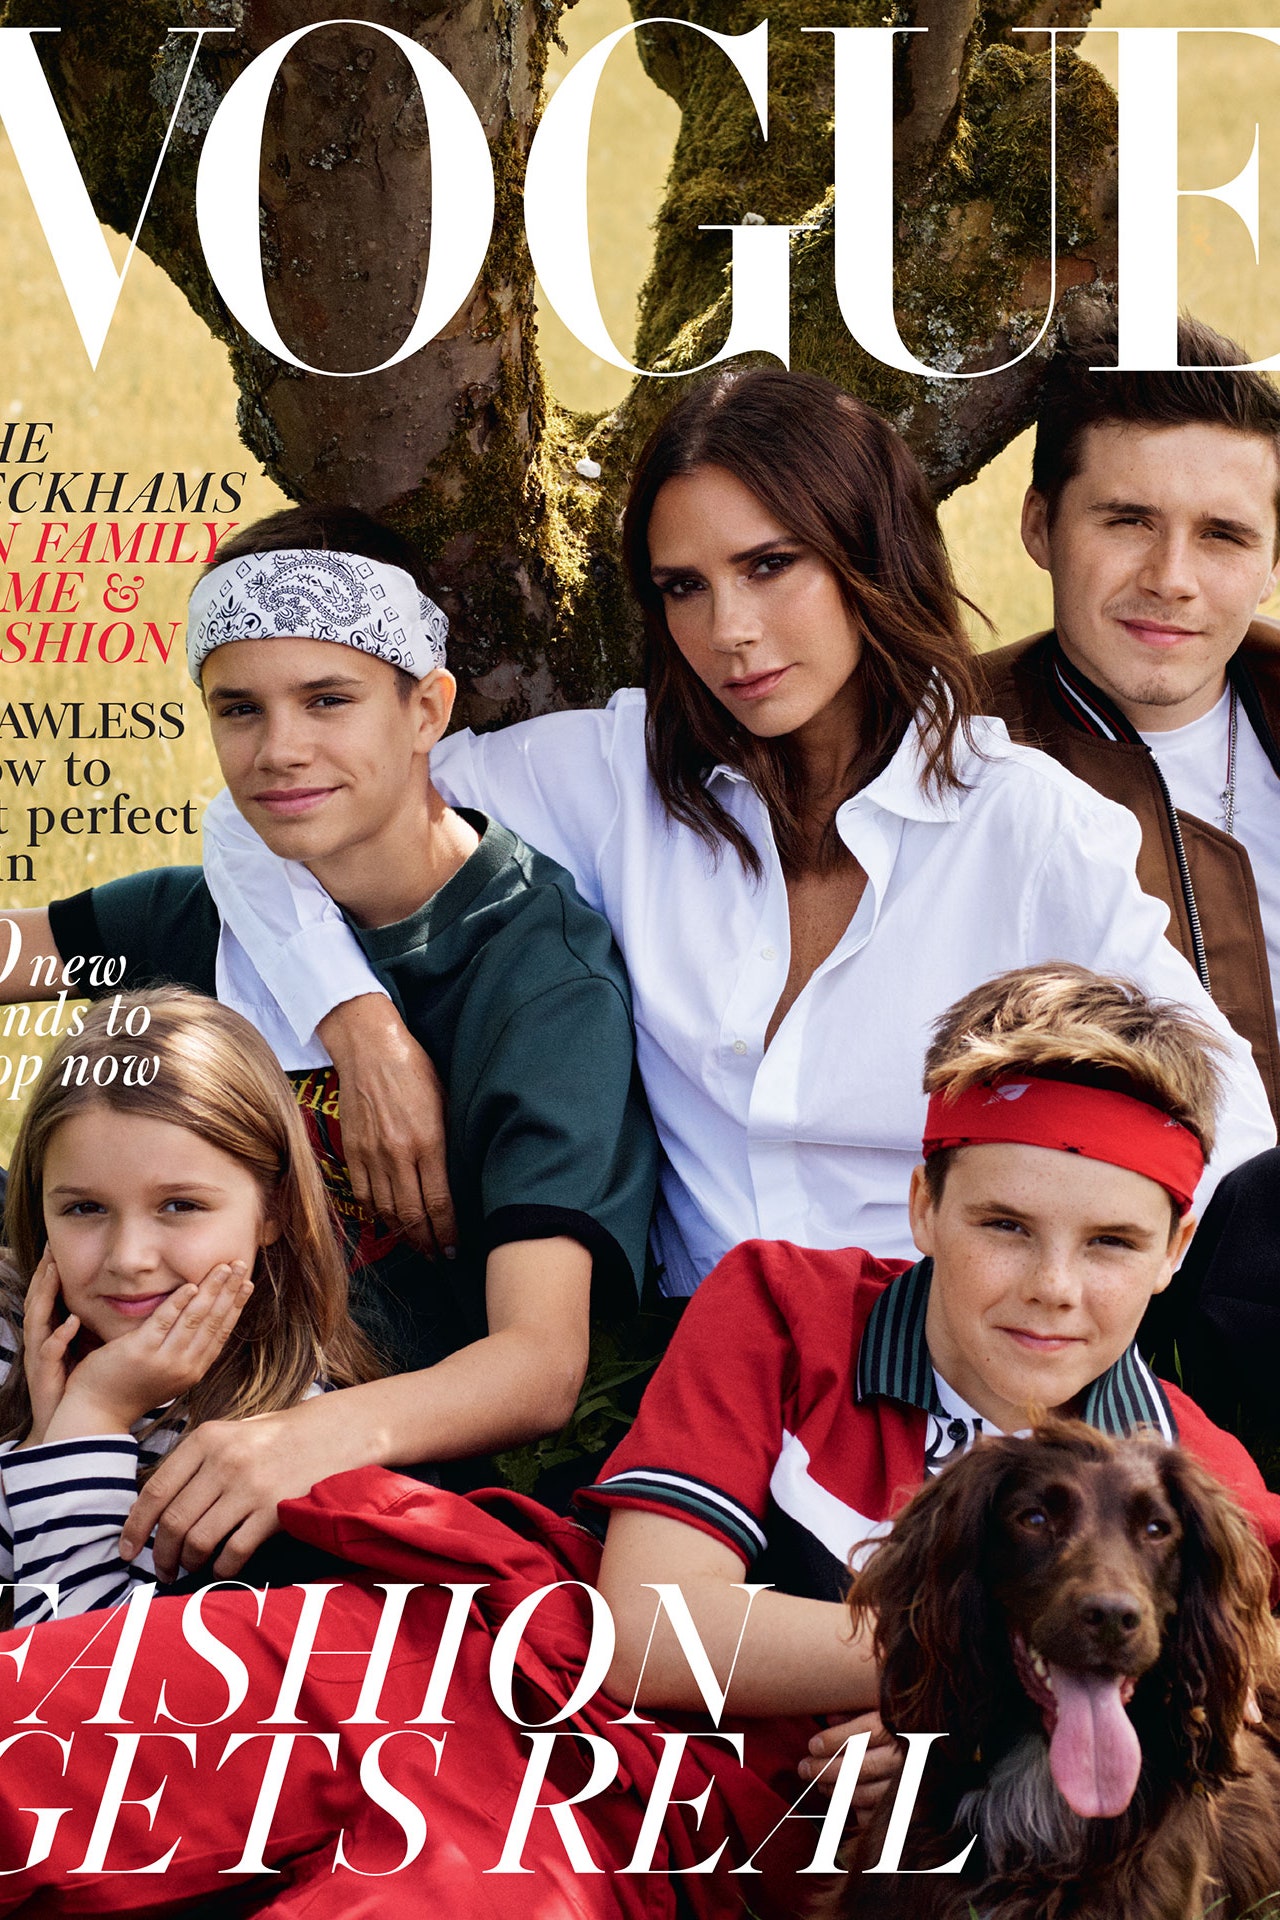 Image may contain Victoria Beckham Cruz Beckham Human Person Magazine and Kevin Connolly